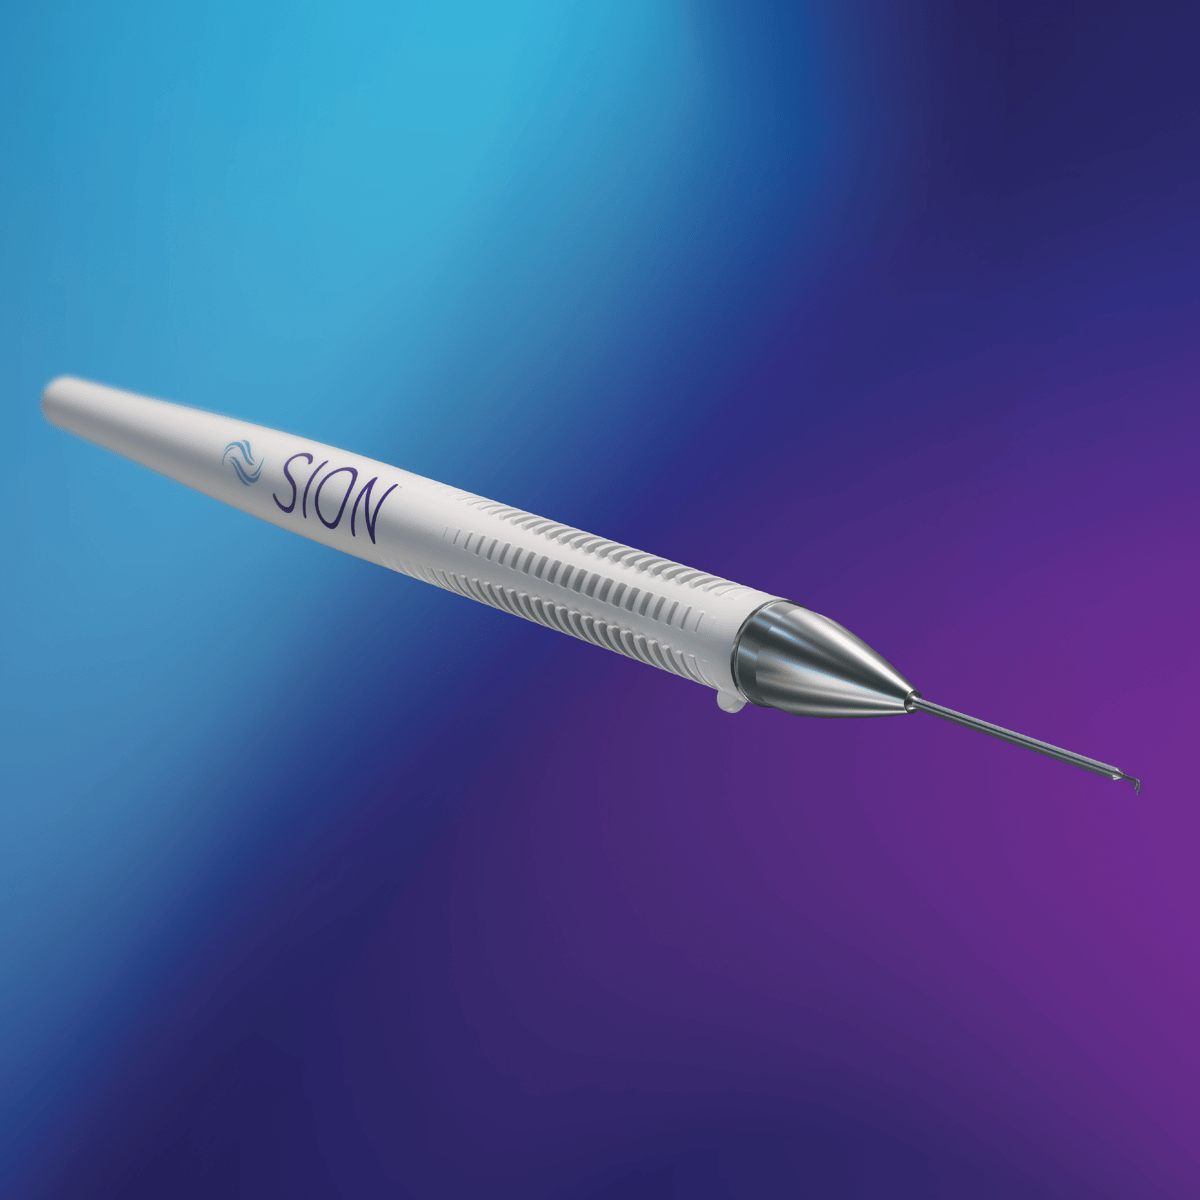 Sion Surgical Instrument